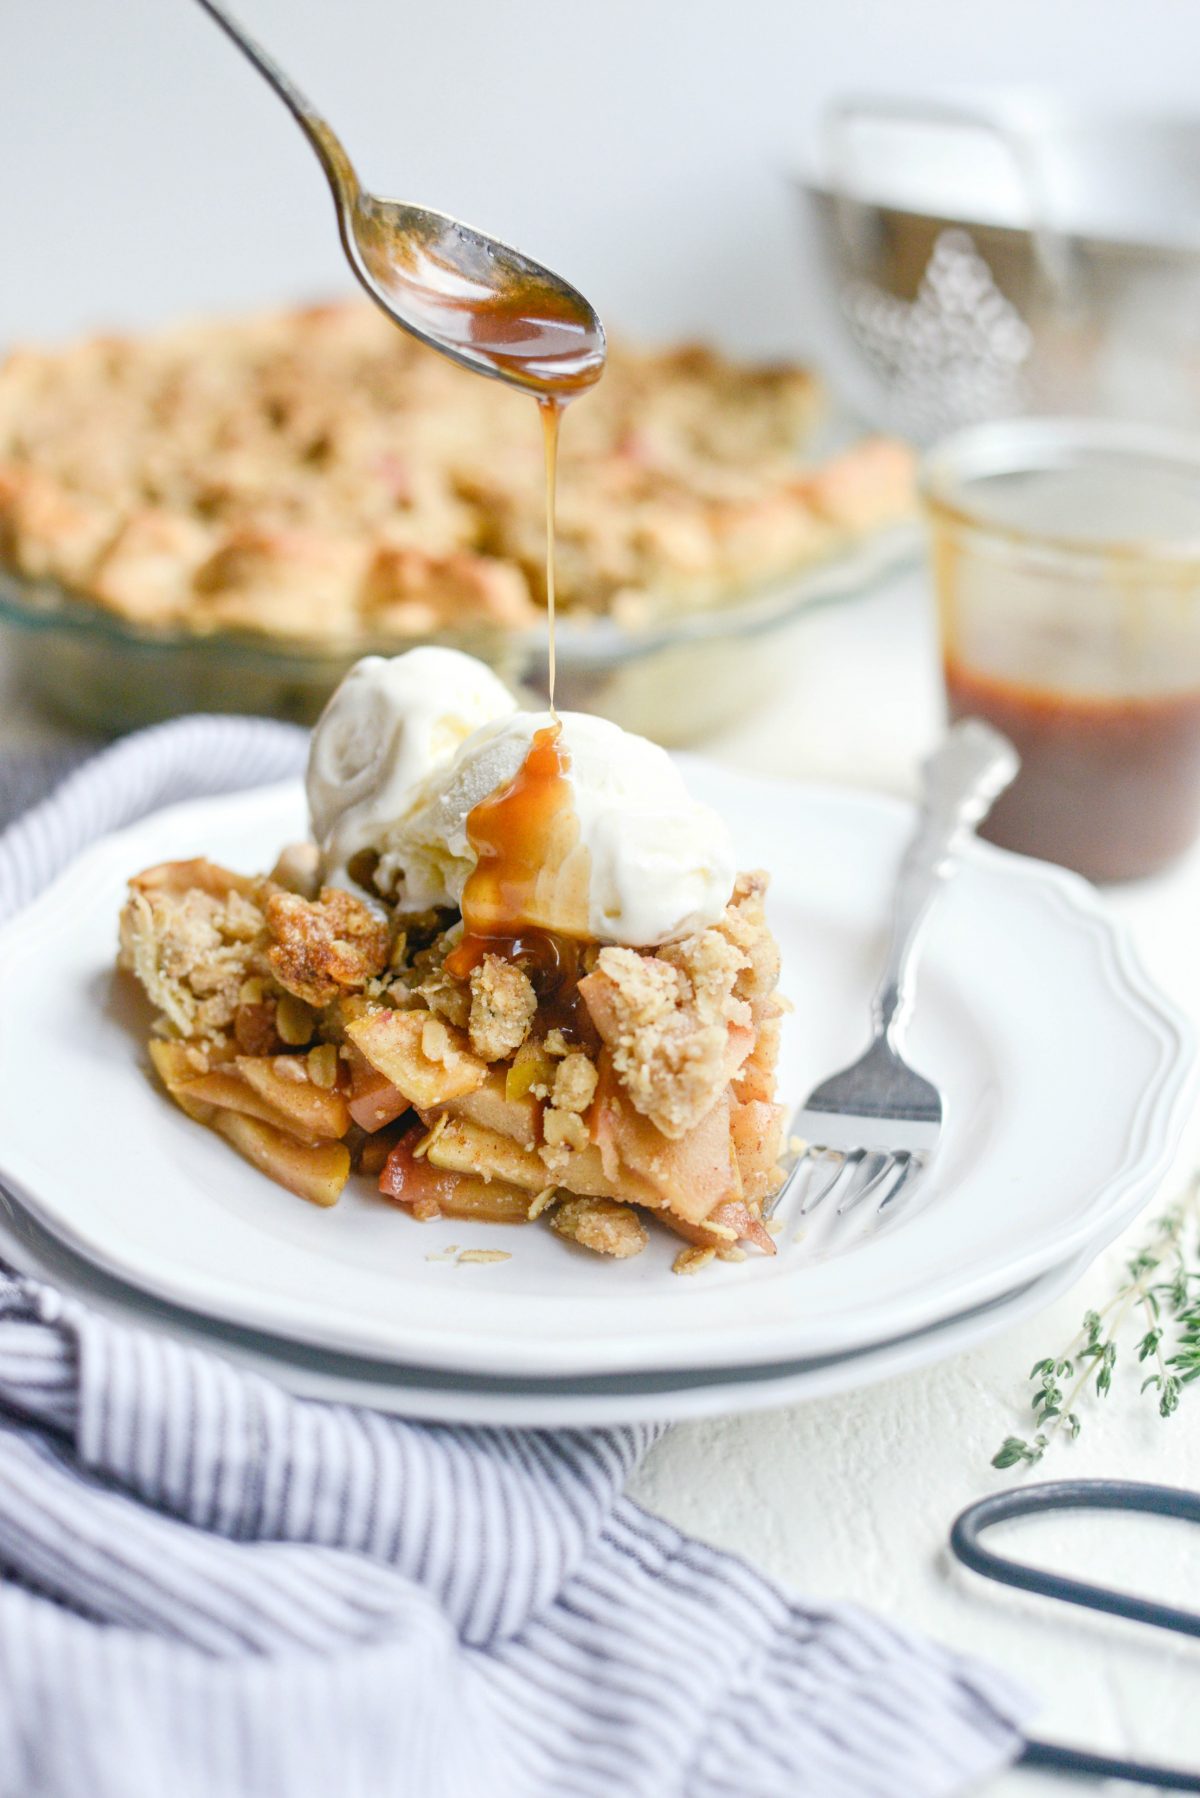 Rustic Brown Sugar Apple Pie with Oatmeal Thyme Crumble